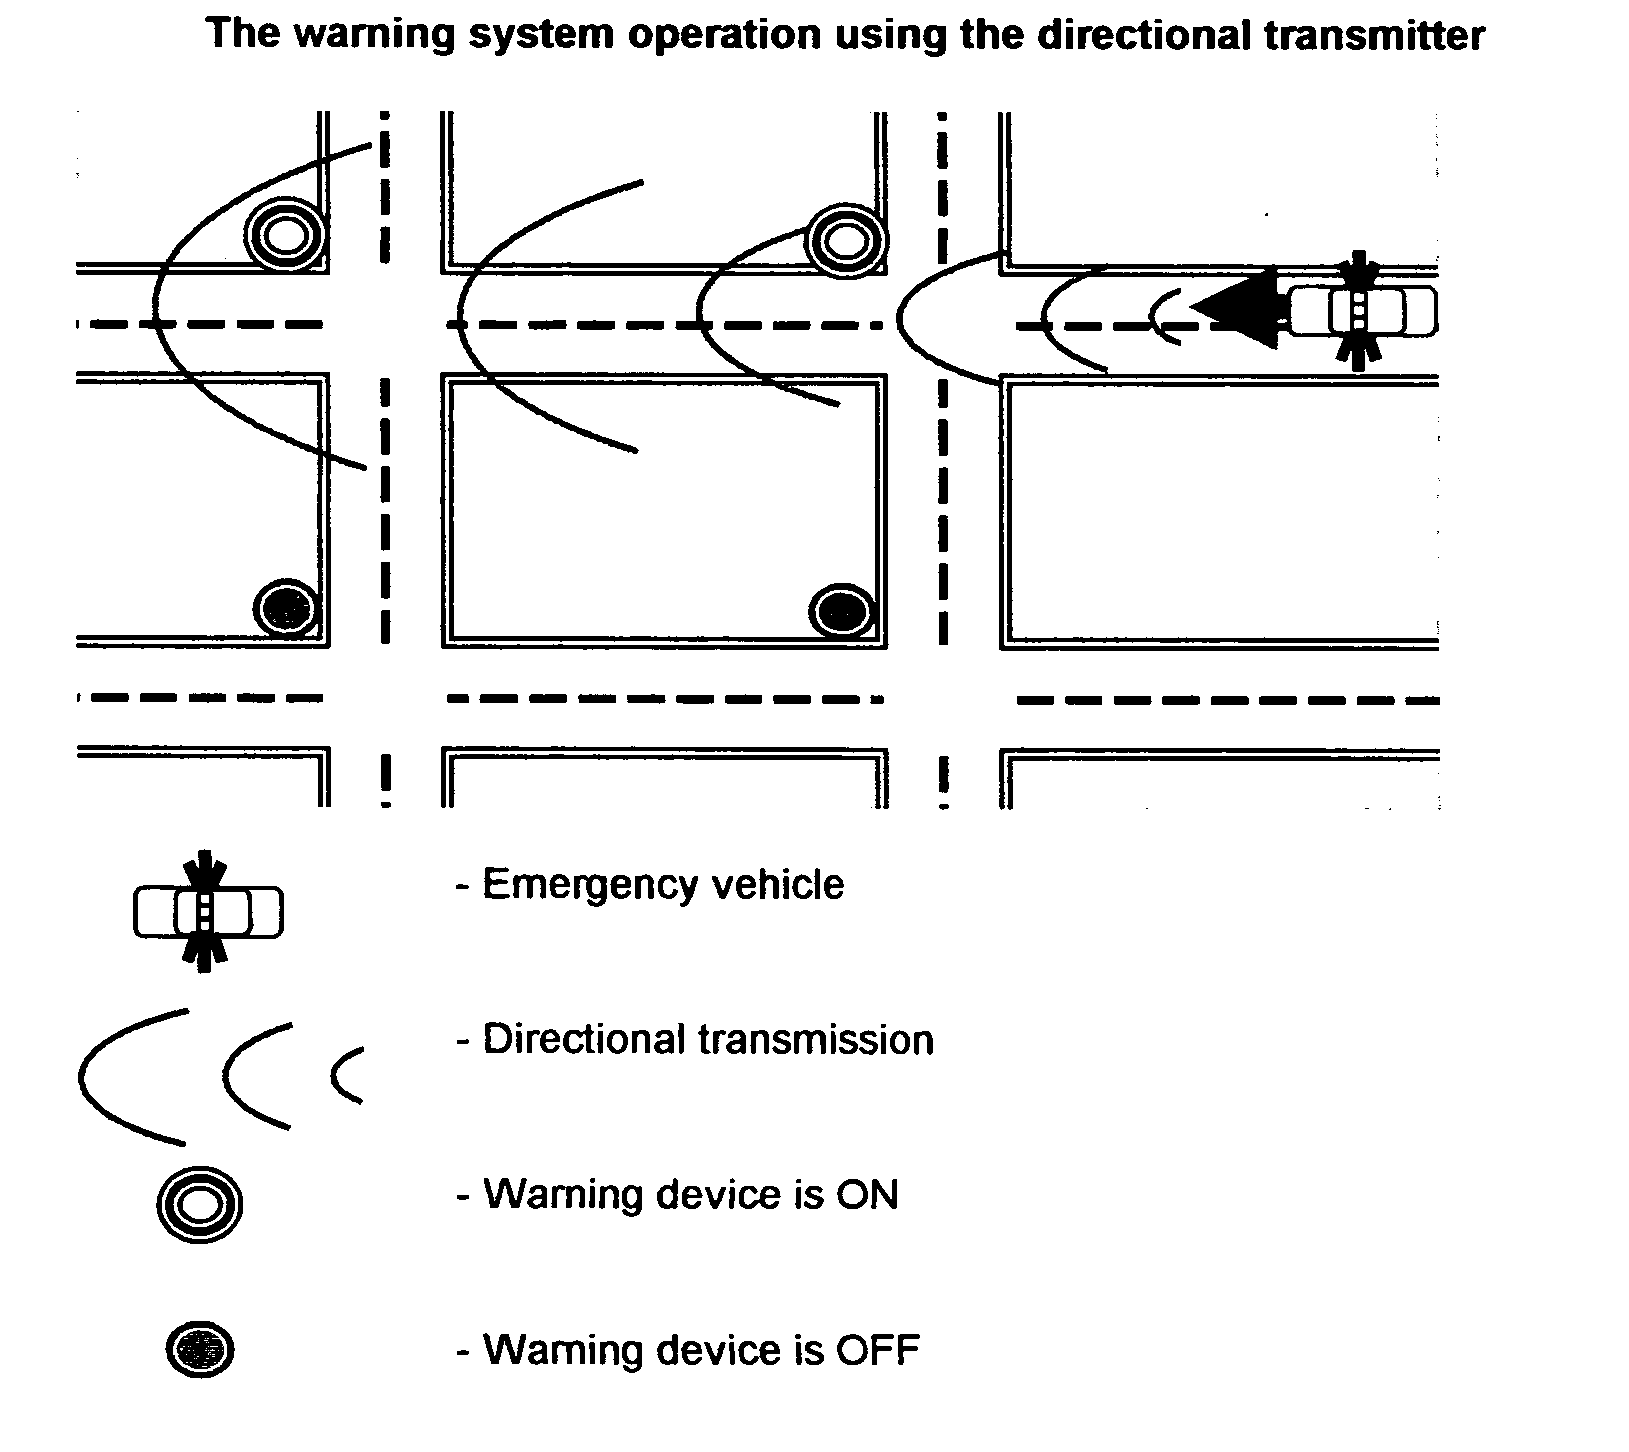 Early warning system for approaching emergency vehicle